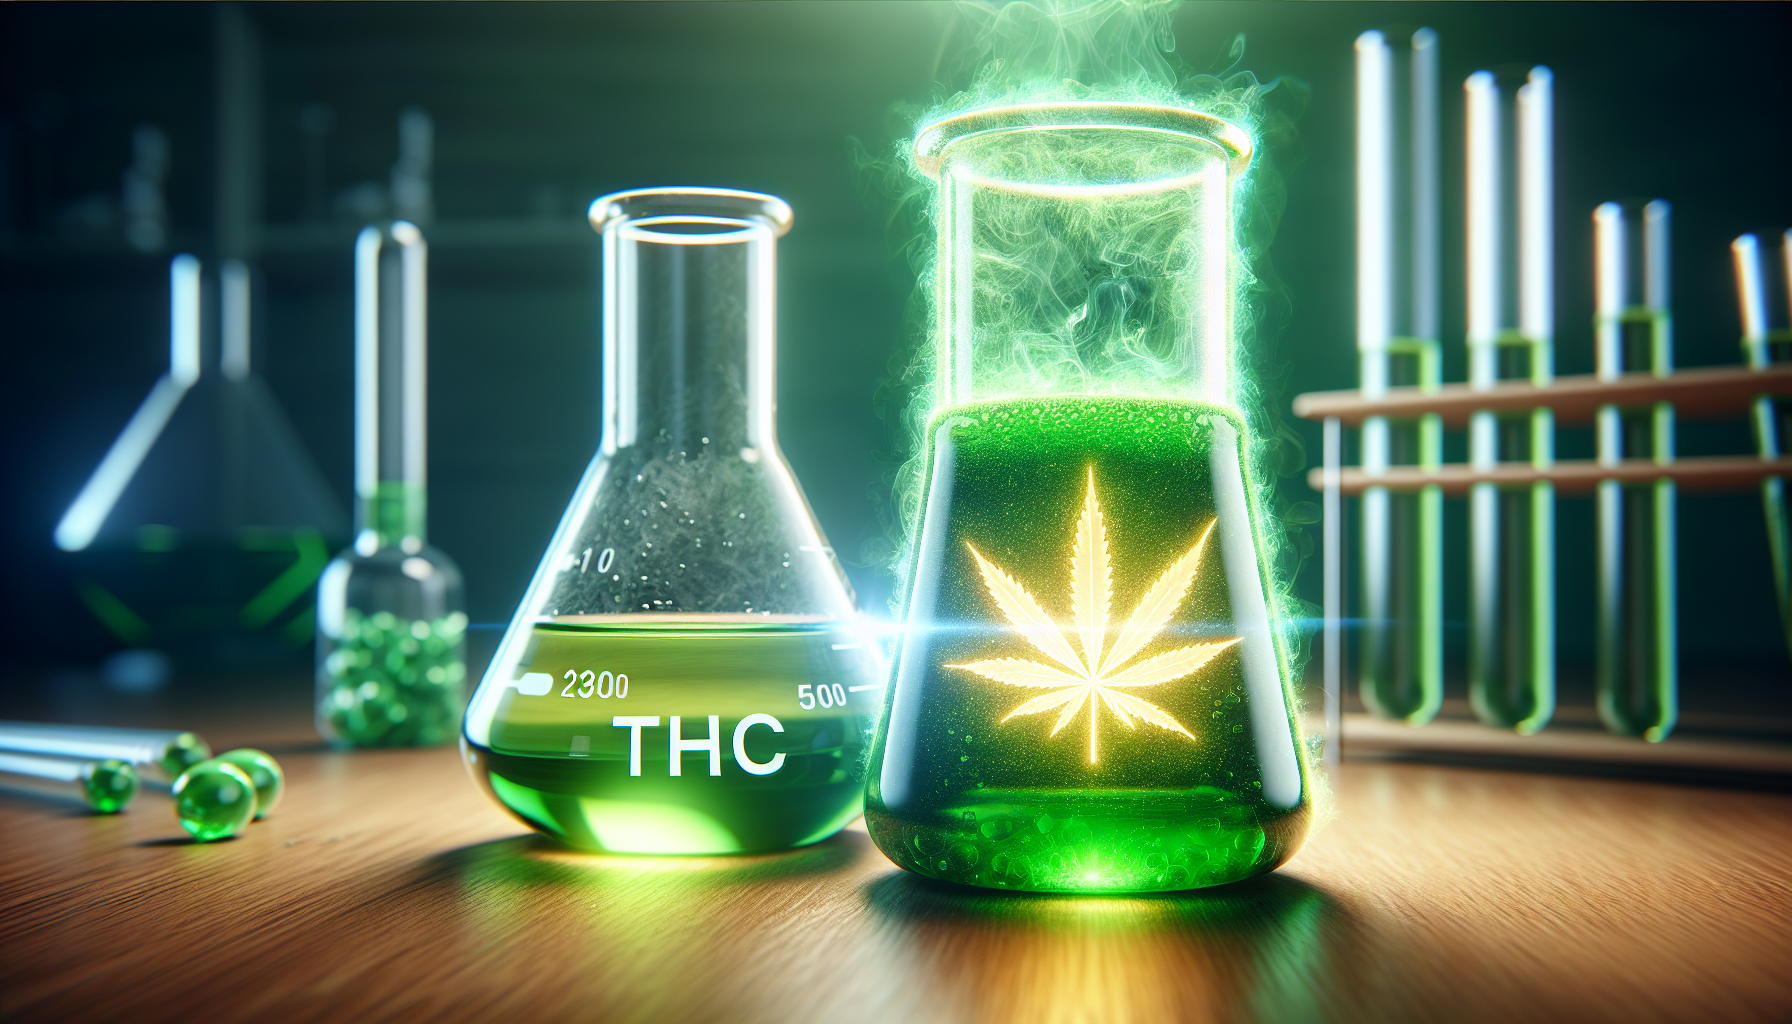 Illustration of potency comparison between THCP and THC